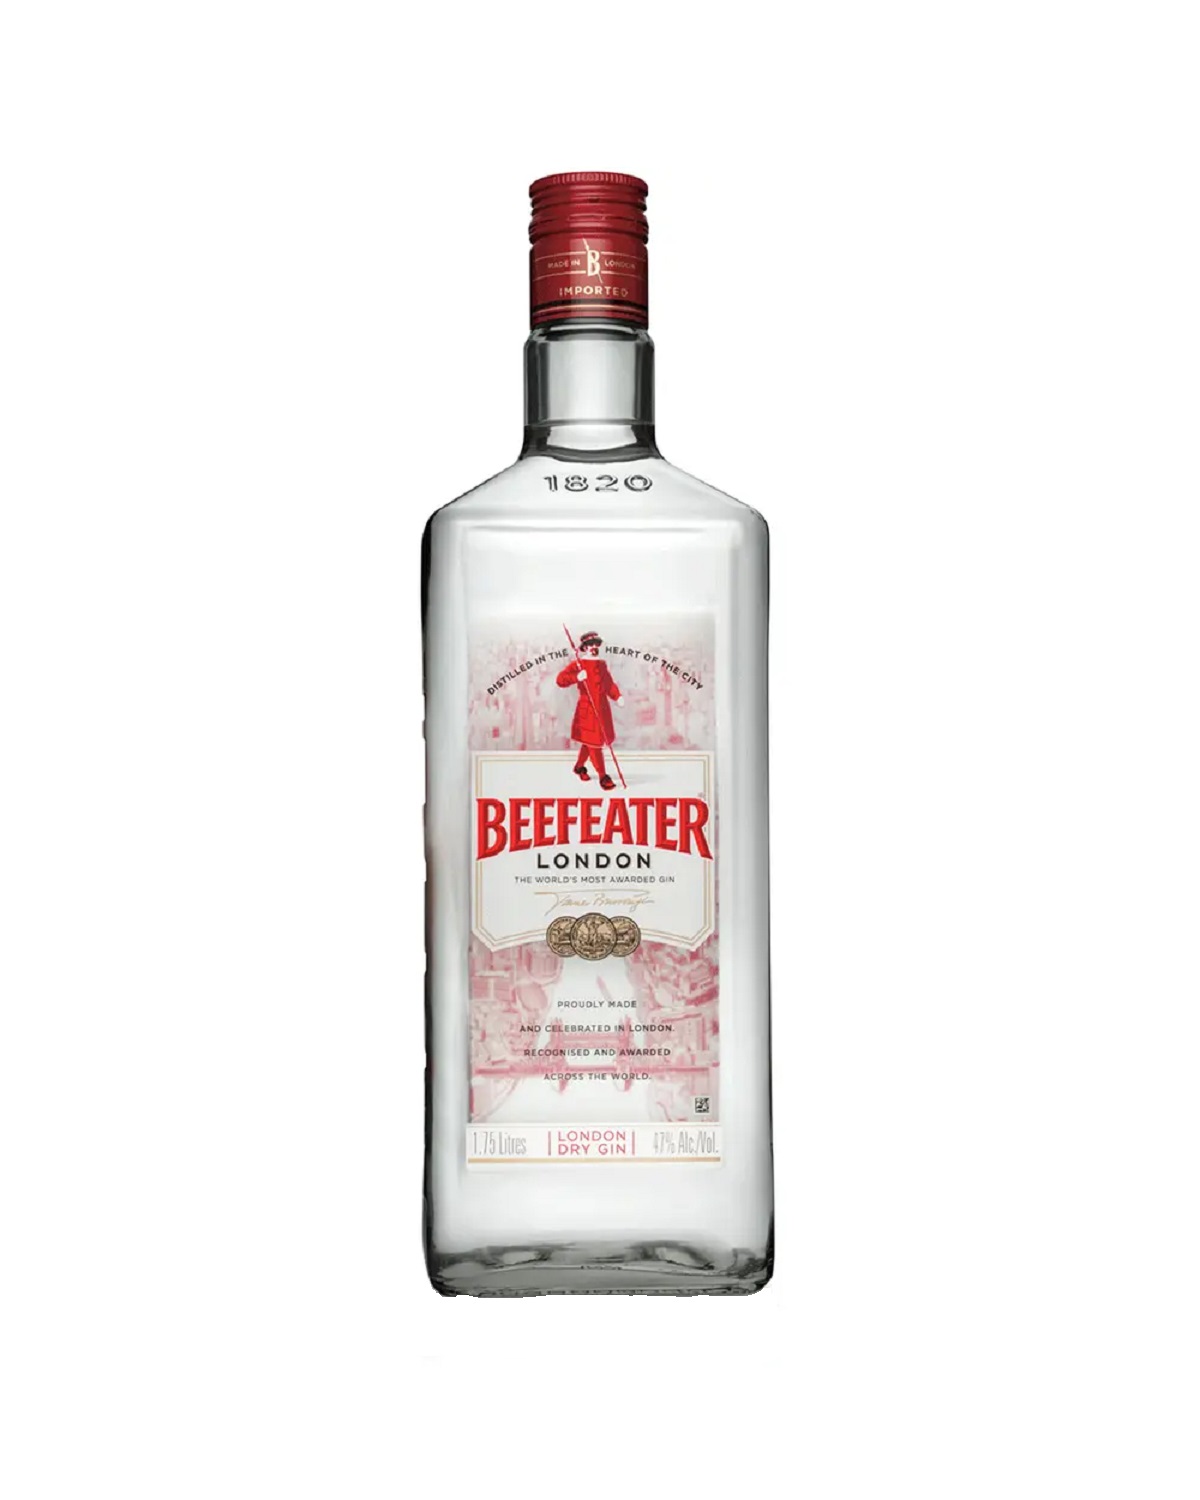 BEEFEATER 1.75L